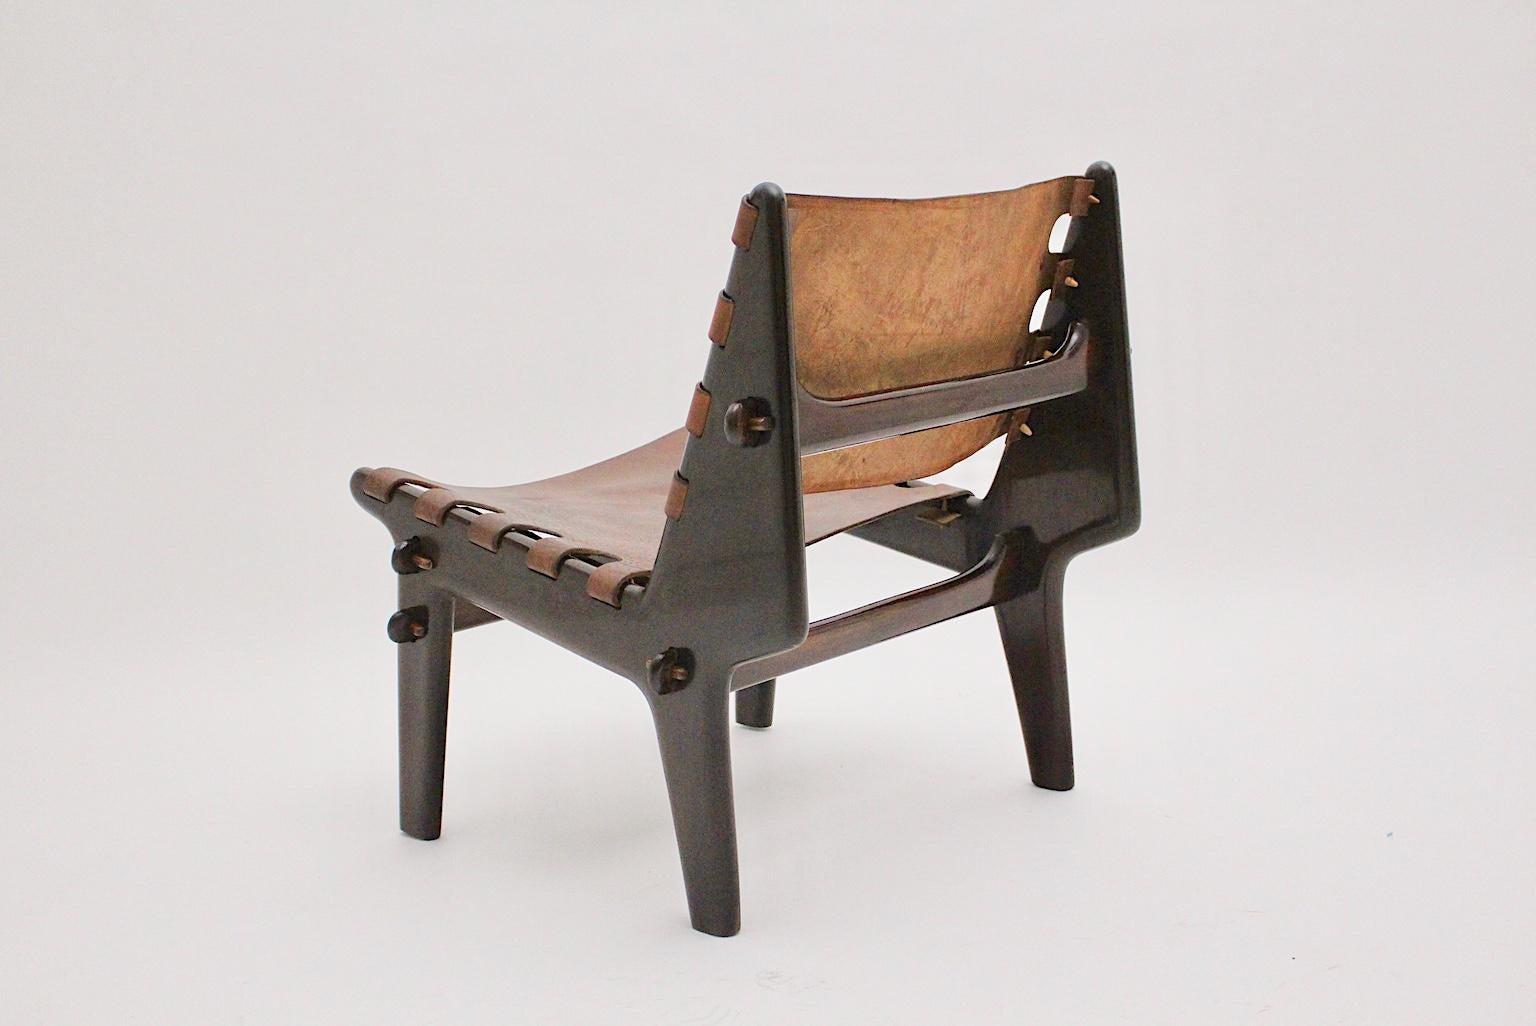 Mid-Century Modern lounge chair from stained beechwood and thick leather, which was designed by Angel Pazmino, 1960s.
The lounge chair has been taken apart and completely cleaned and professionally polished by hand before reassembly.
The seat and